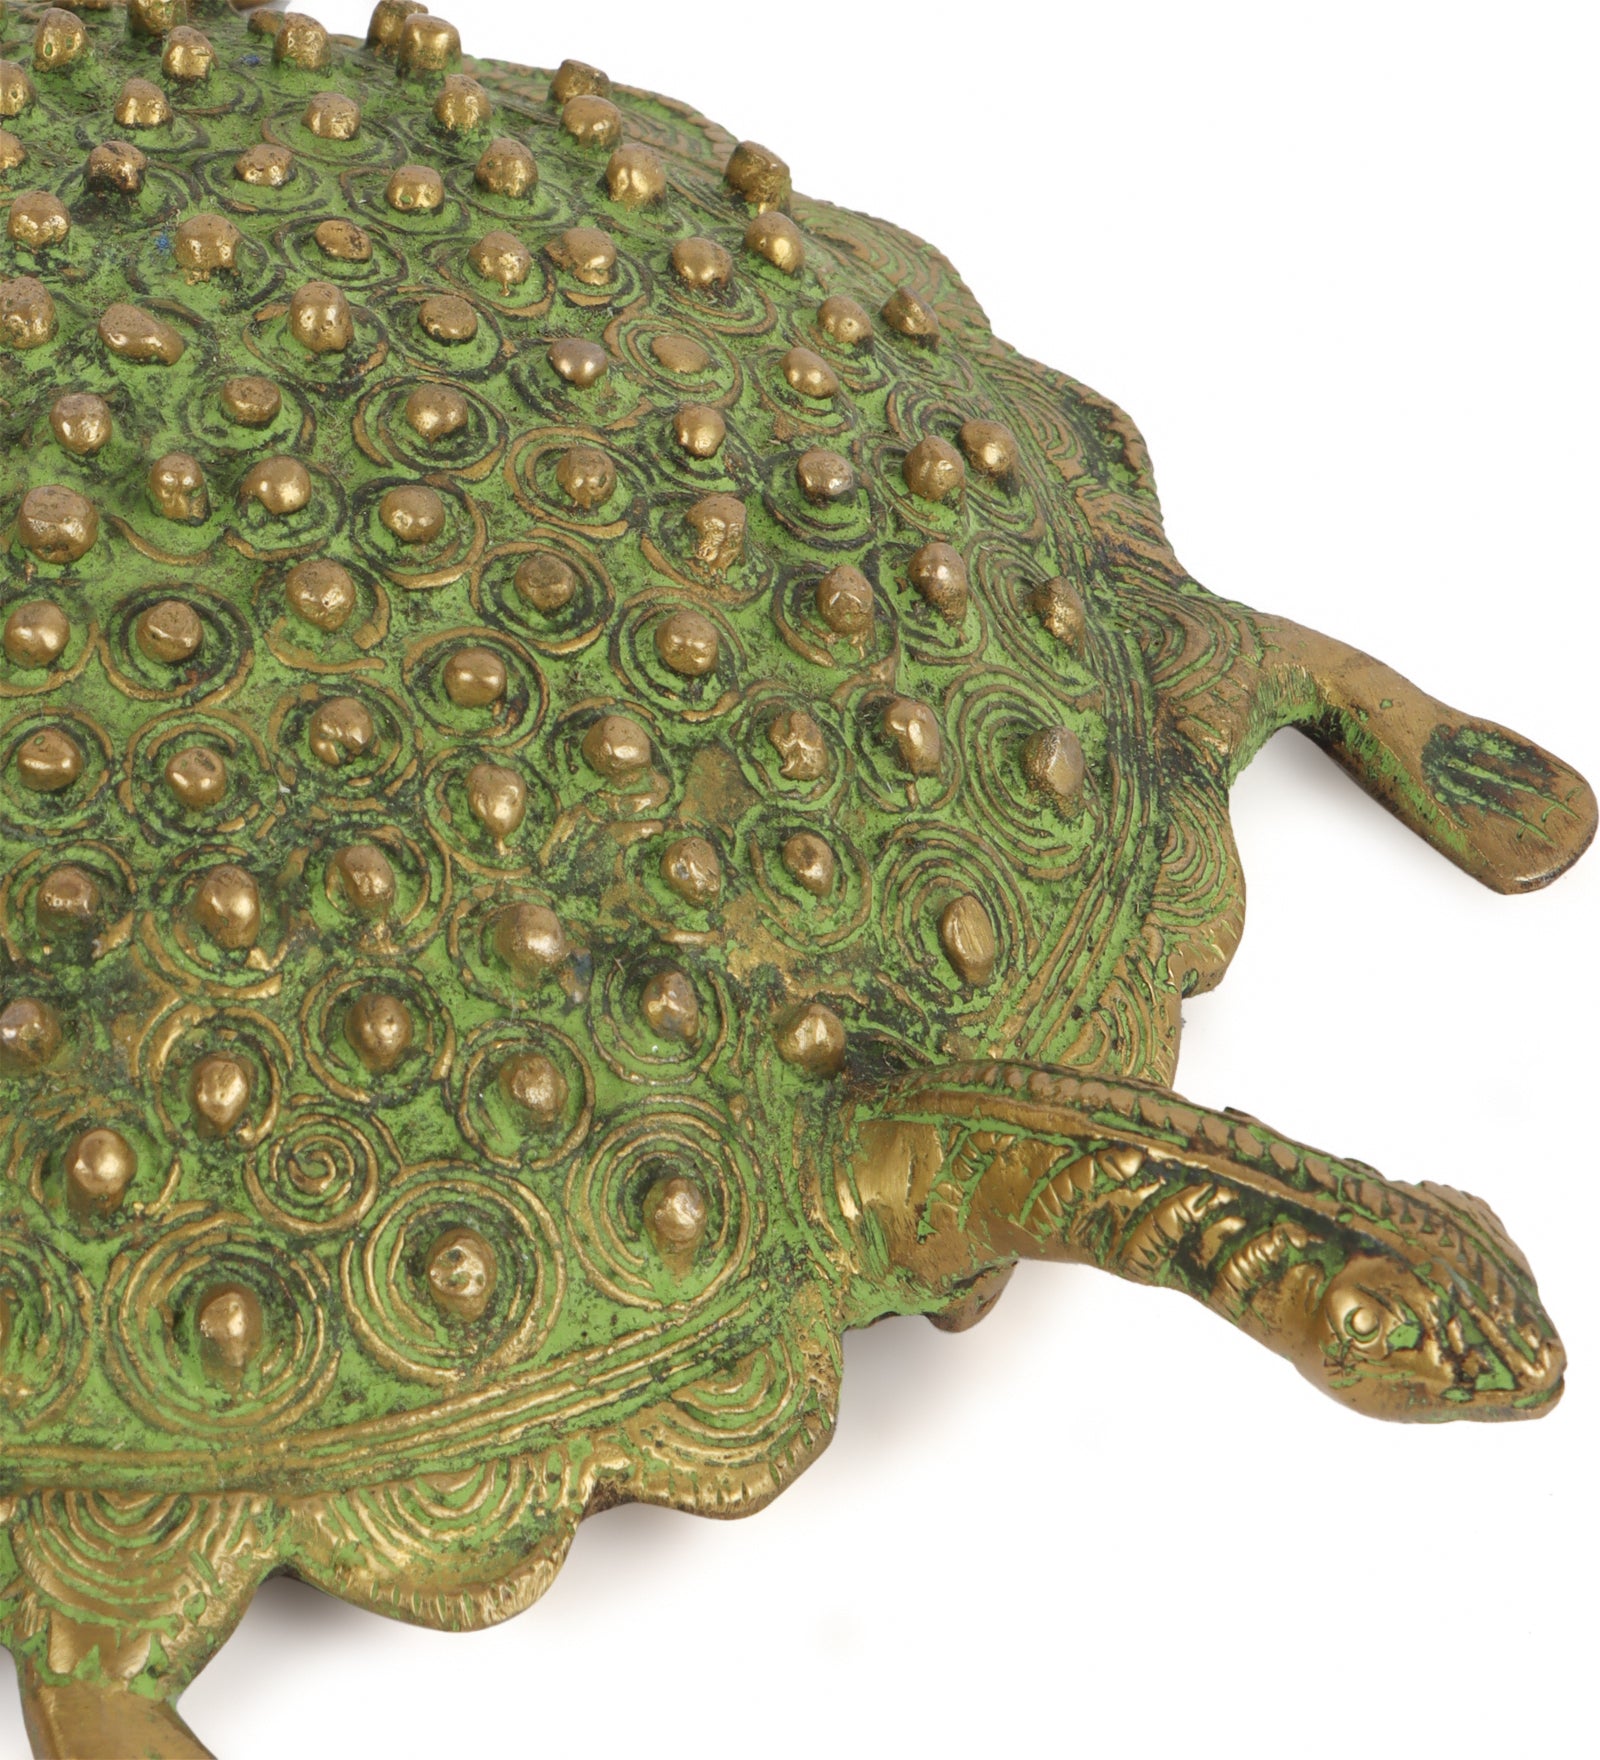 The Spotted Turtle (Single)